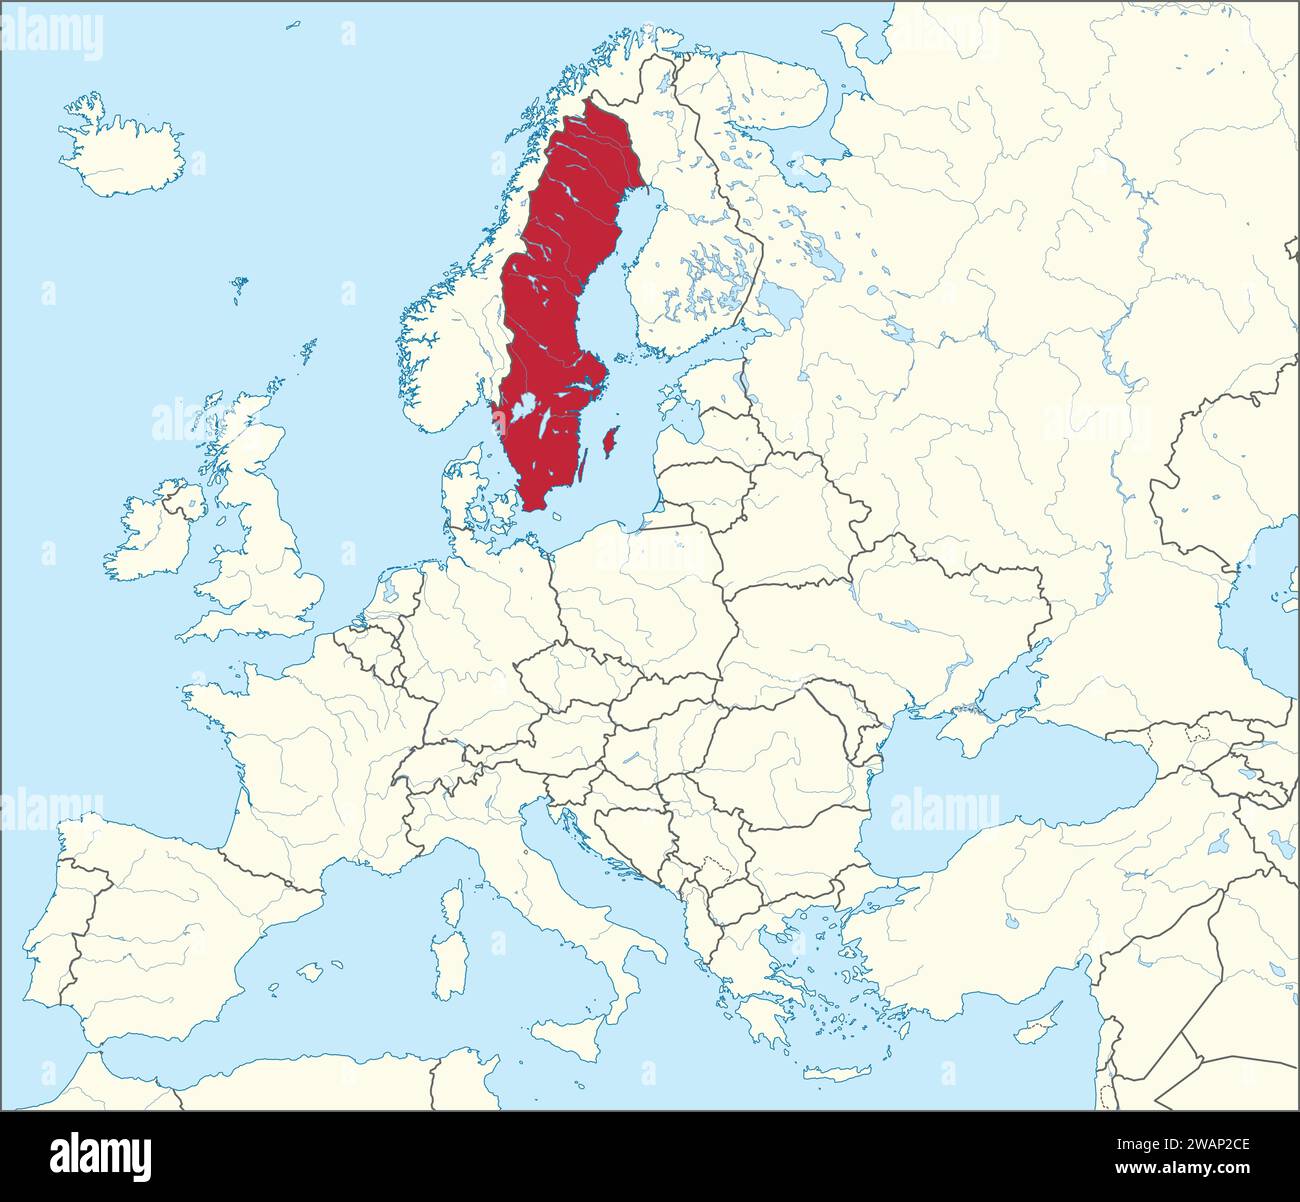 Location map of the KINGDOM OF SWEDEN, EUROPE Stock Vector